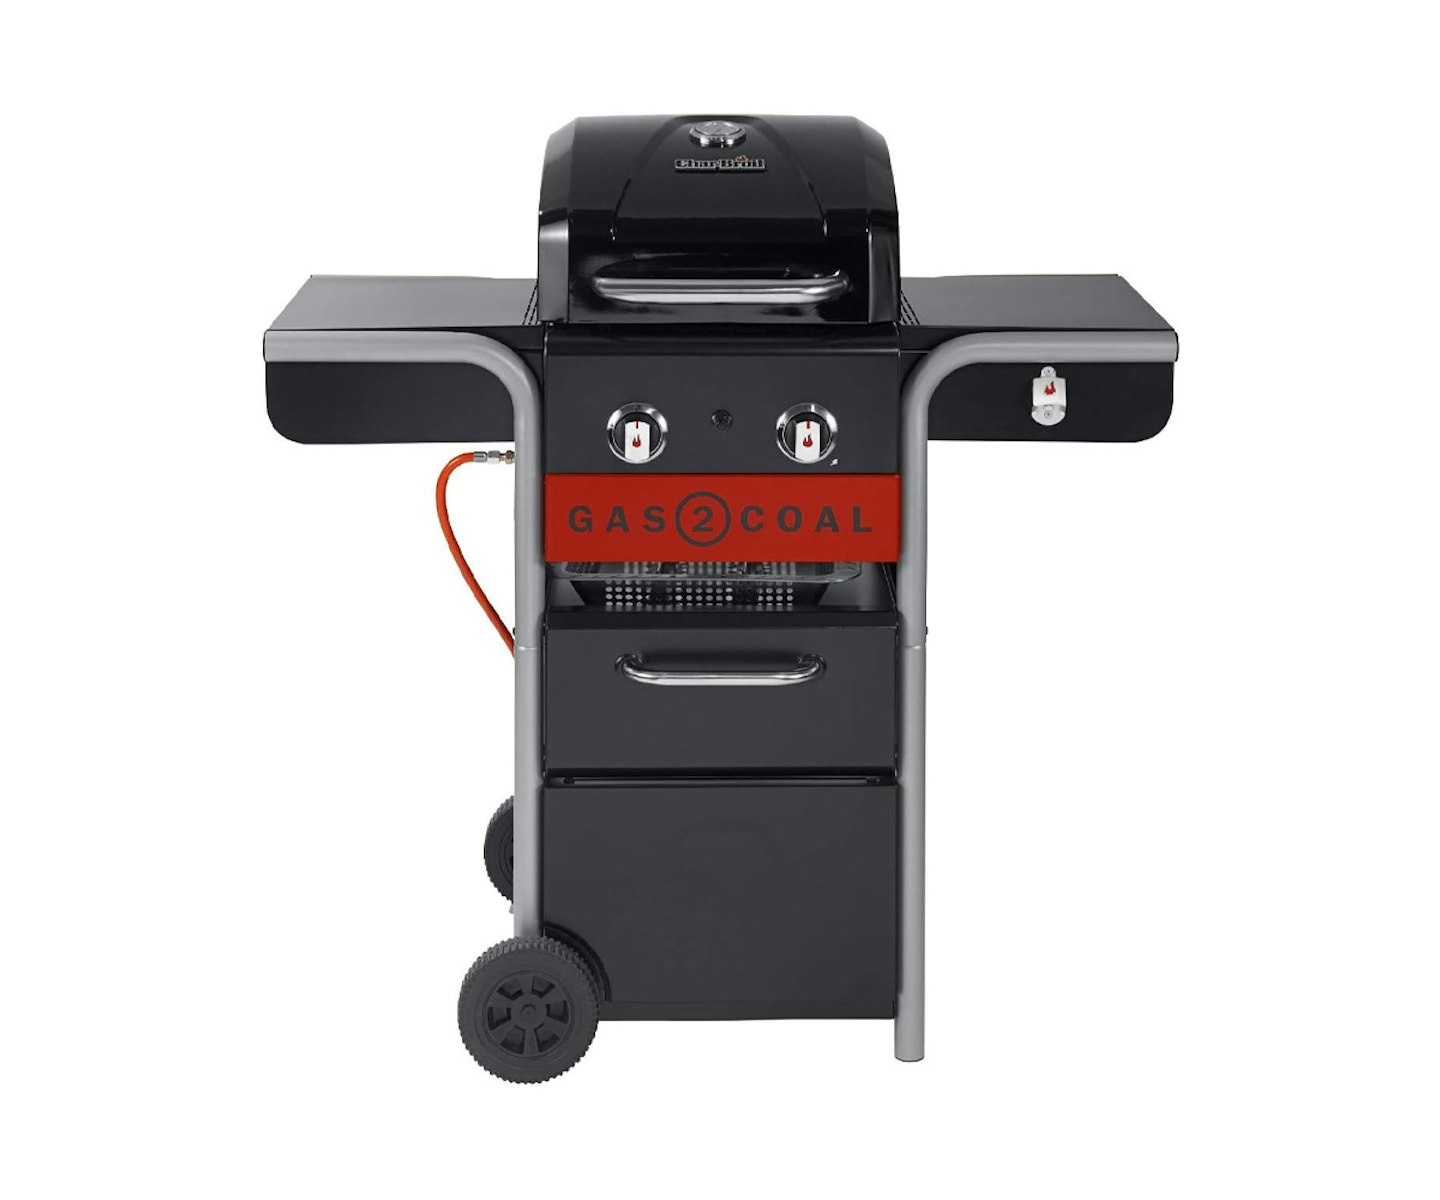 Char-Broil 140924 Gas2Coal 210 Hybrid Grill Gas Barbecue